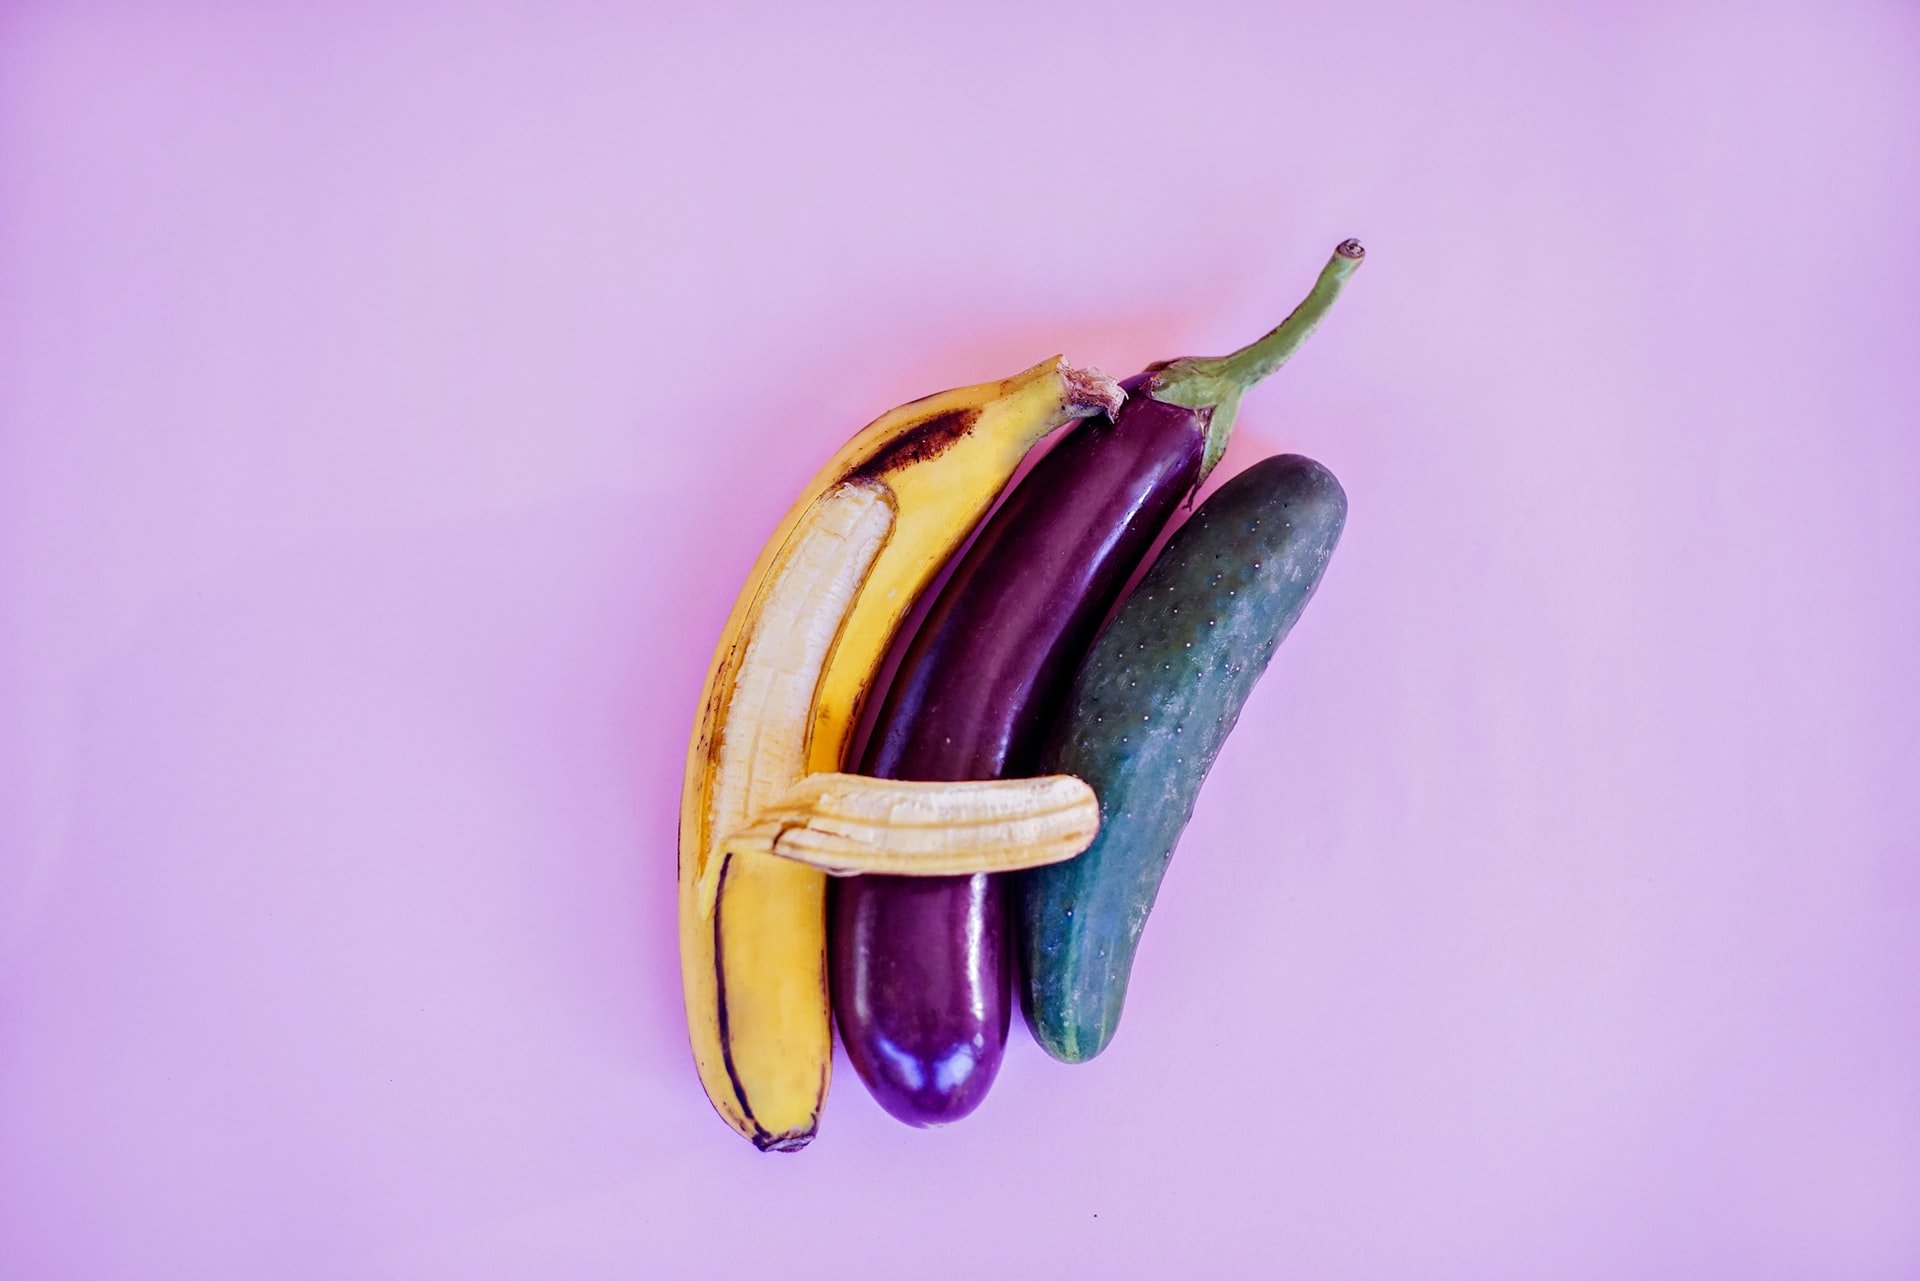 A banana, eggplant and cucumber next to each other, with one banana peel reaching across the other two fruits